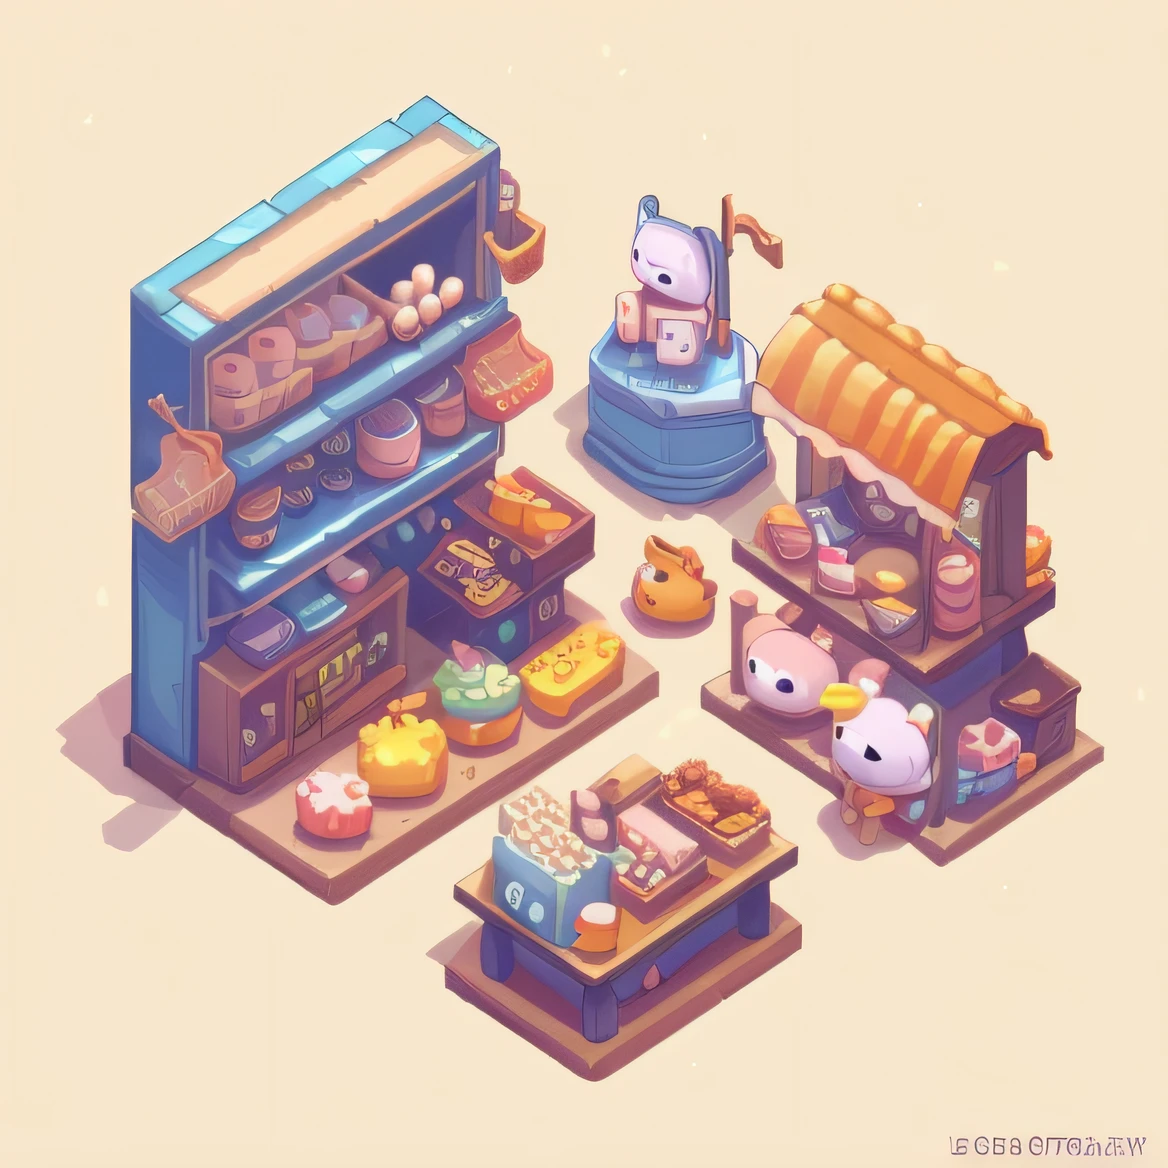 Store, shelves full of food, isometric 2D game art, cute bakery, isometric game art, isometric art, isometric illustration fun, isometric game assets, high detail store, isometric pixels, super detailed color low poly art, stylized game art, isometric illustration, isometric pixel art